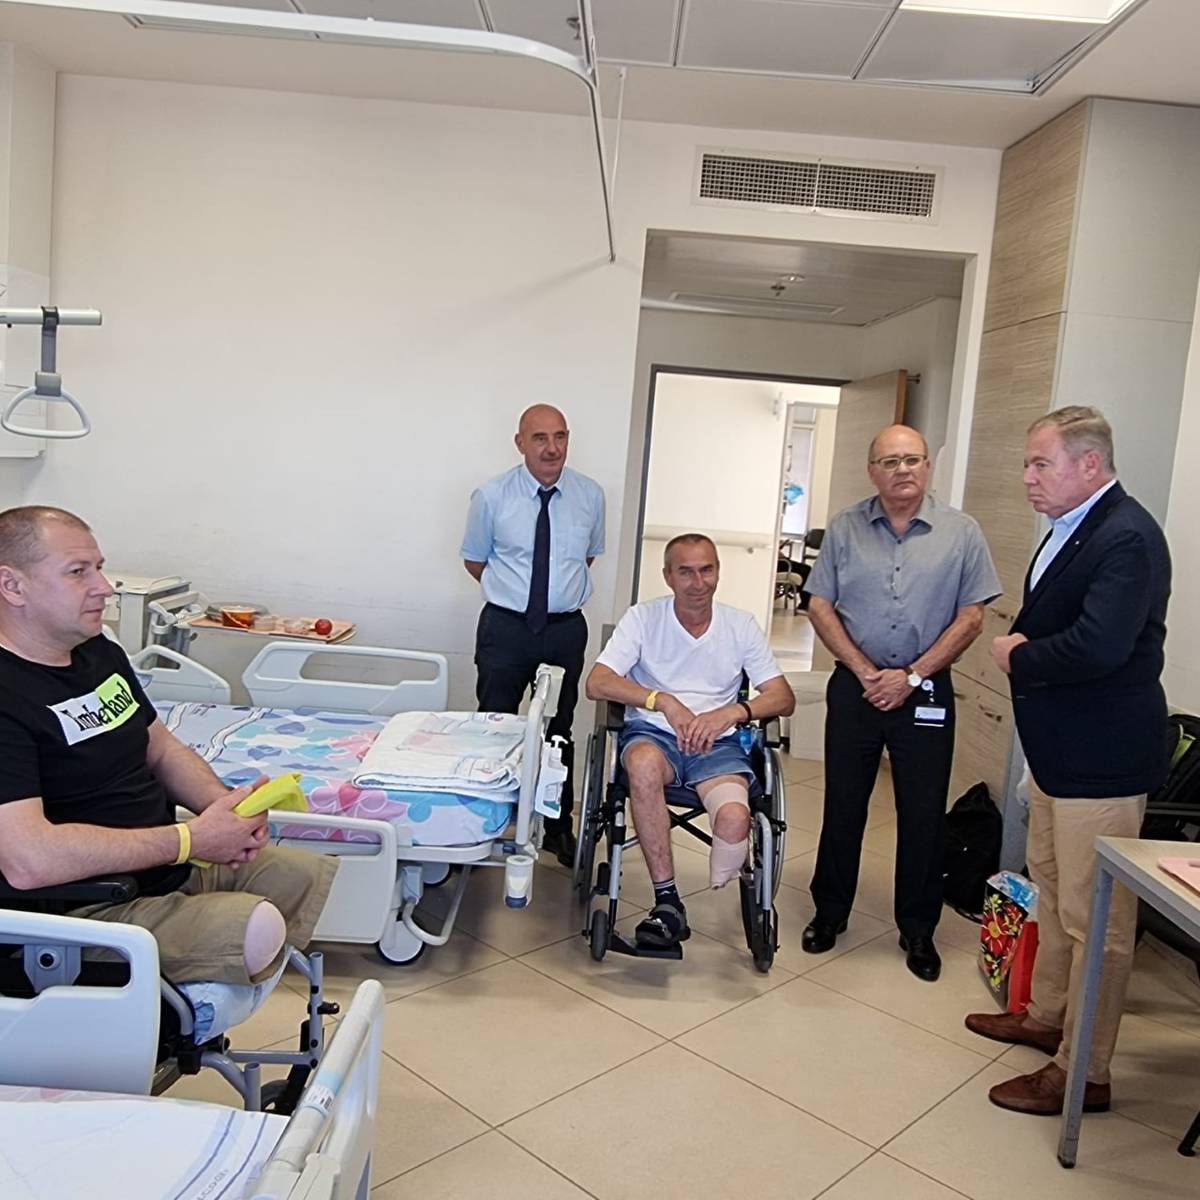 Ukraine Ambassador Korniychuk, at right wearing a jacket, meets at the Barzilai Medical Center in November with patients Aleksander, at left, and Piotr. Also in attendance are the hospital's CEO, Chezy Levy, center, and rehab department head Dr. Michael Warschavsky, left.